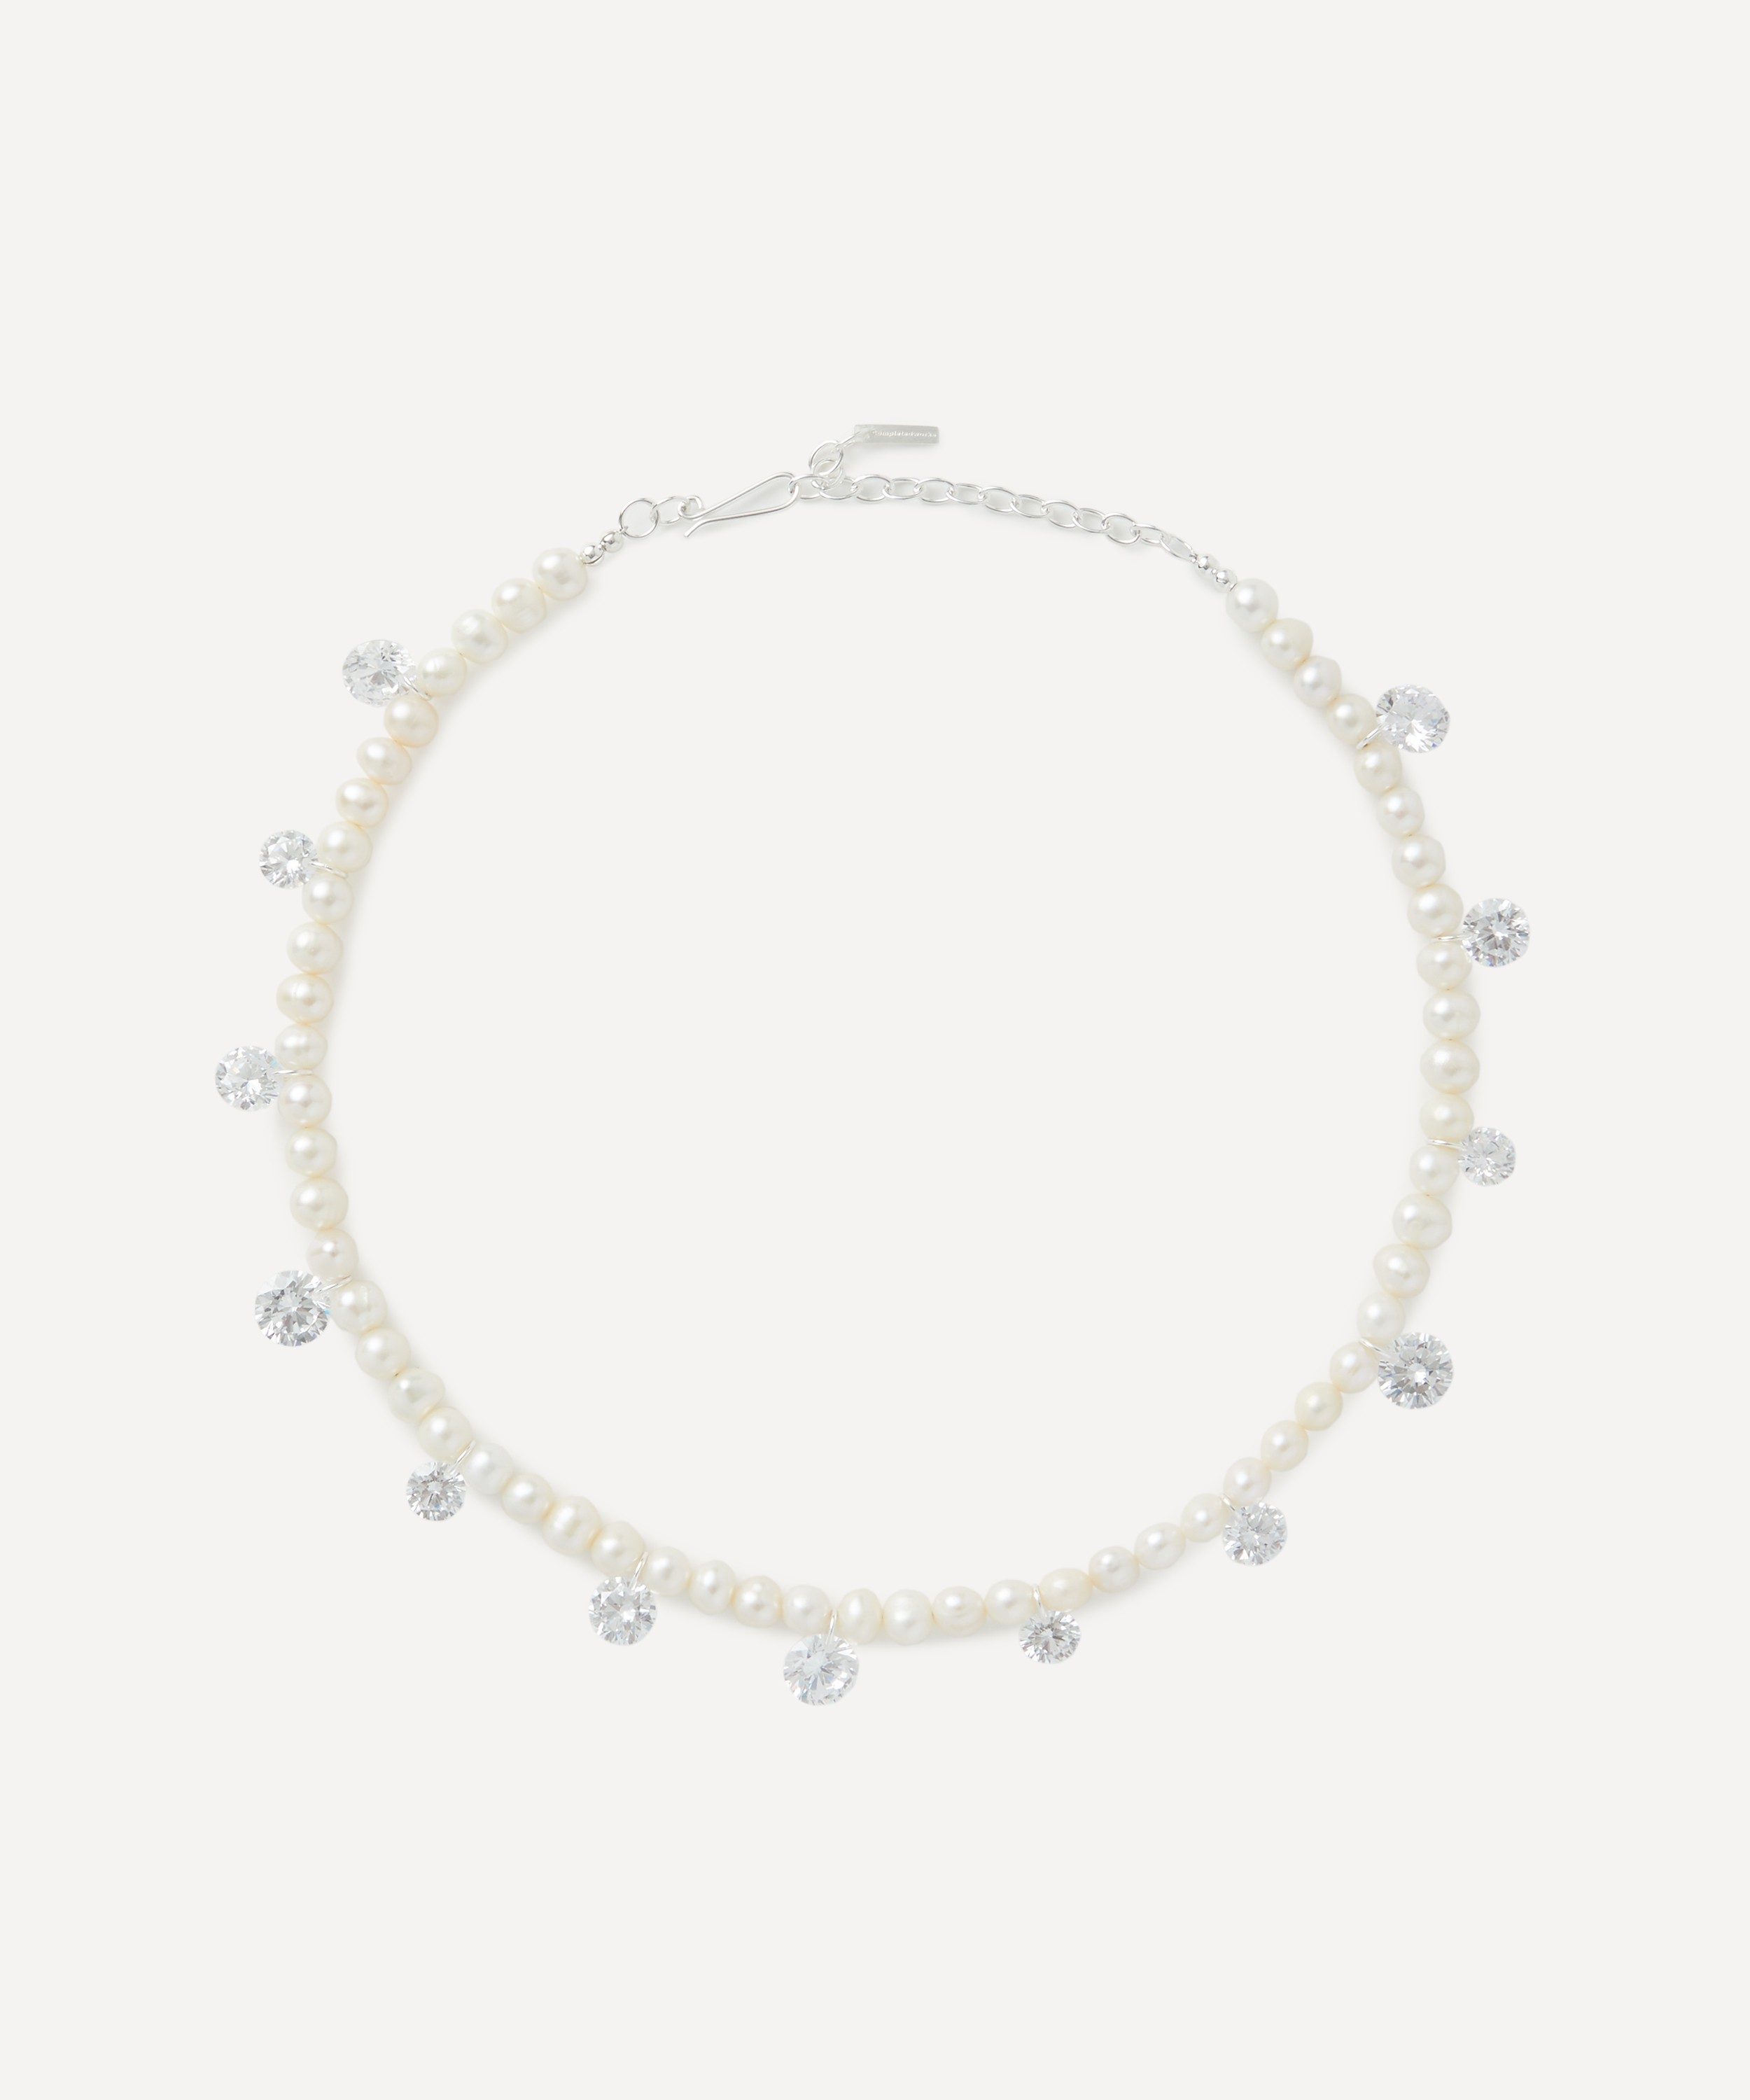 Completedworks - Sterling Silver Dreaming Awake Pearl Necklace